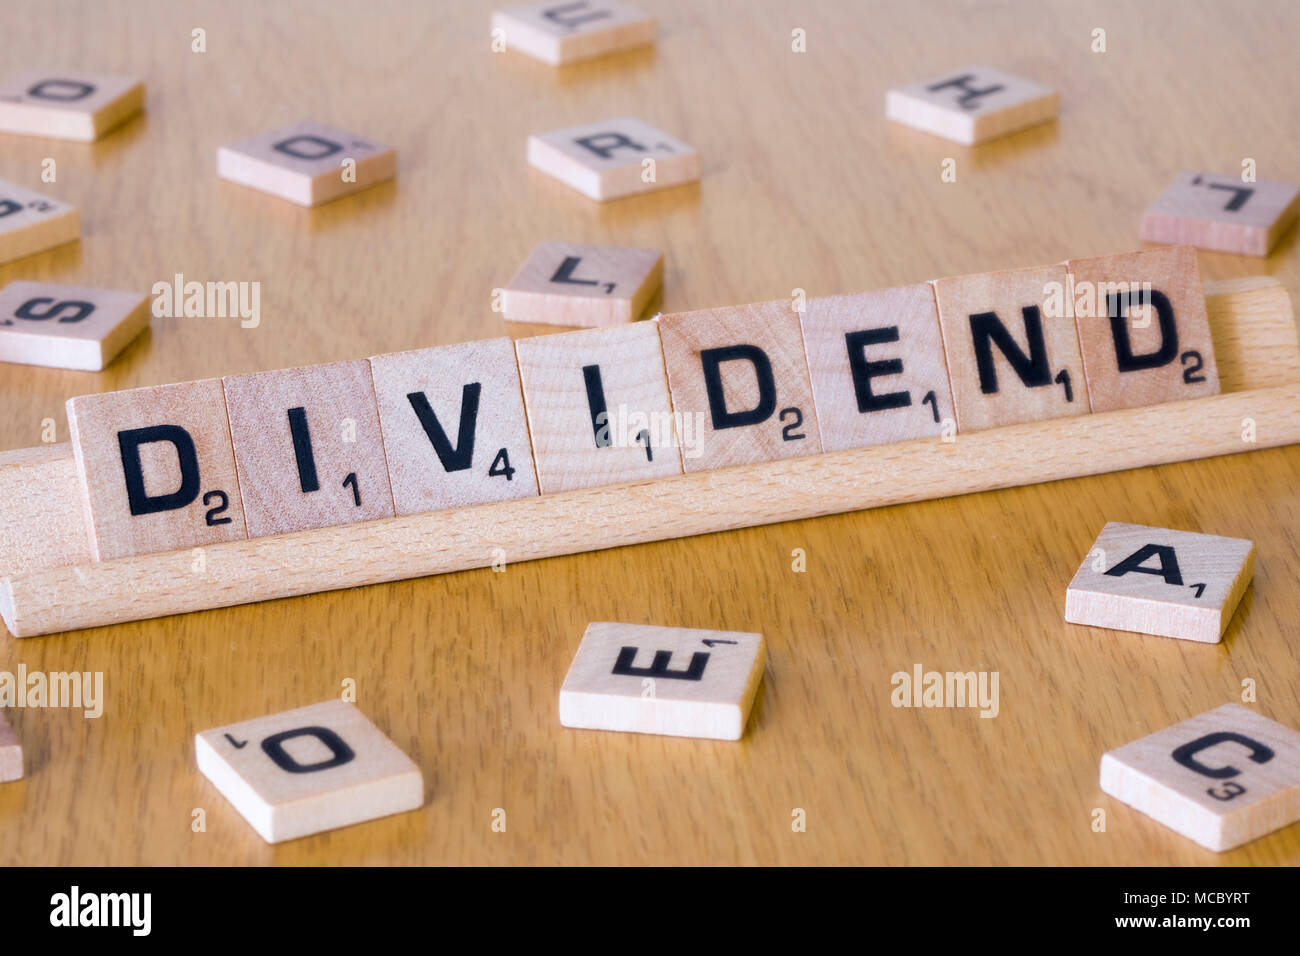 Scrabble letters spelling out the word Dividend. Concept - the stock market, company dividends, financial market, investing, stocks and shares Stock Photo